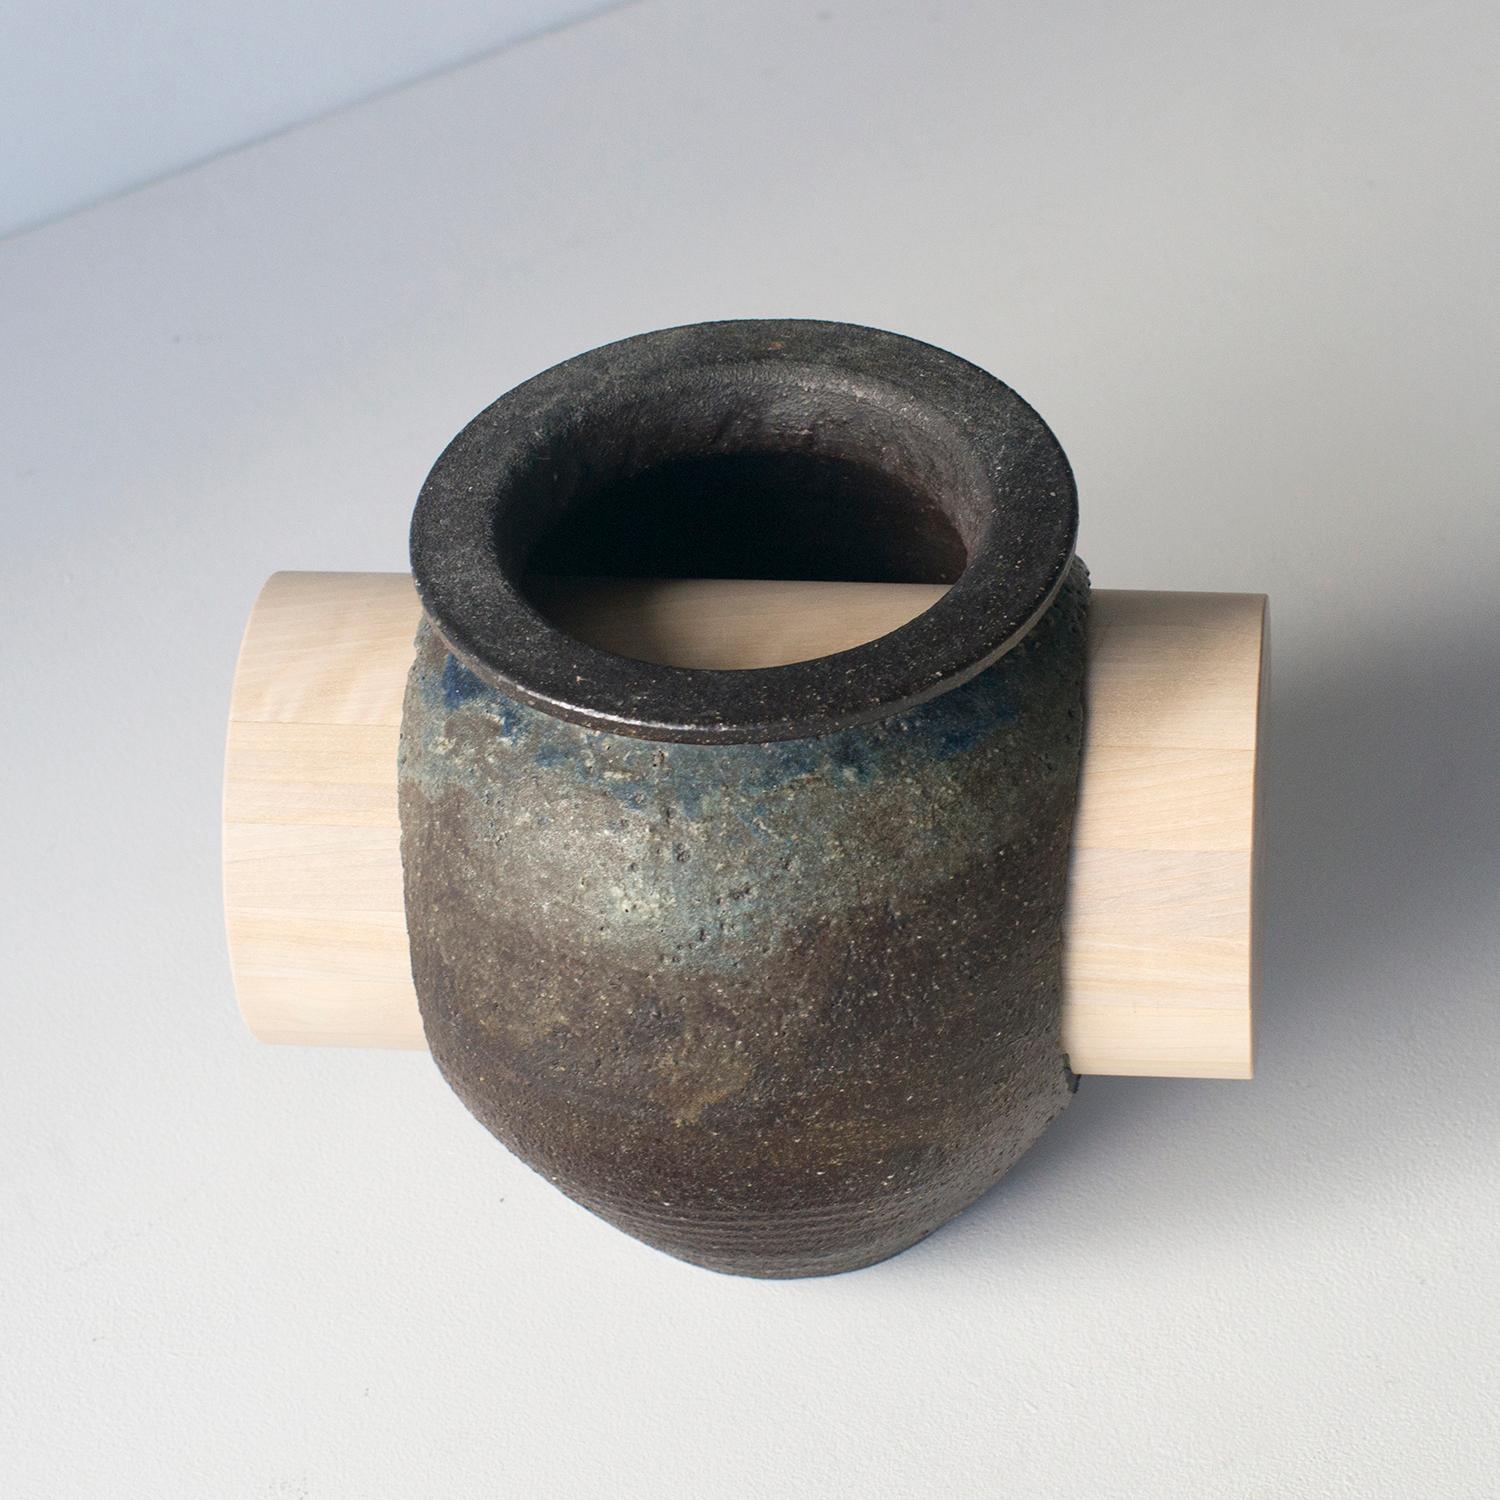 Japanese Pot and Wood3 Abstract Sculpture Contemporary Zen Japonism Style For Sale